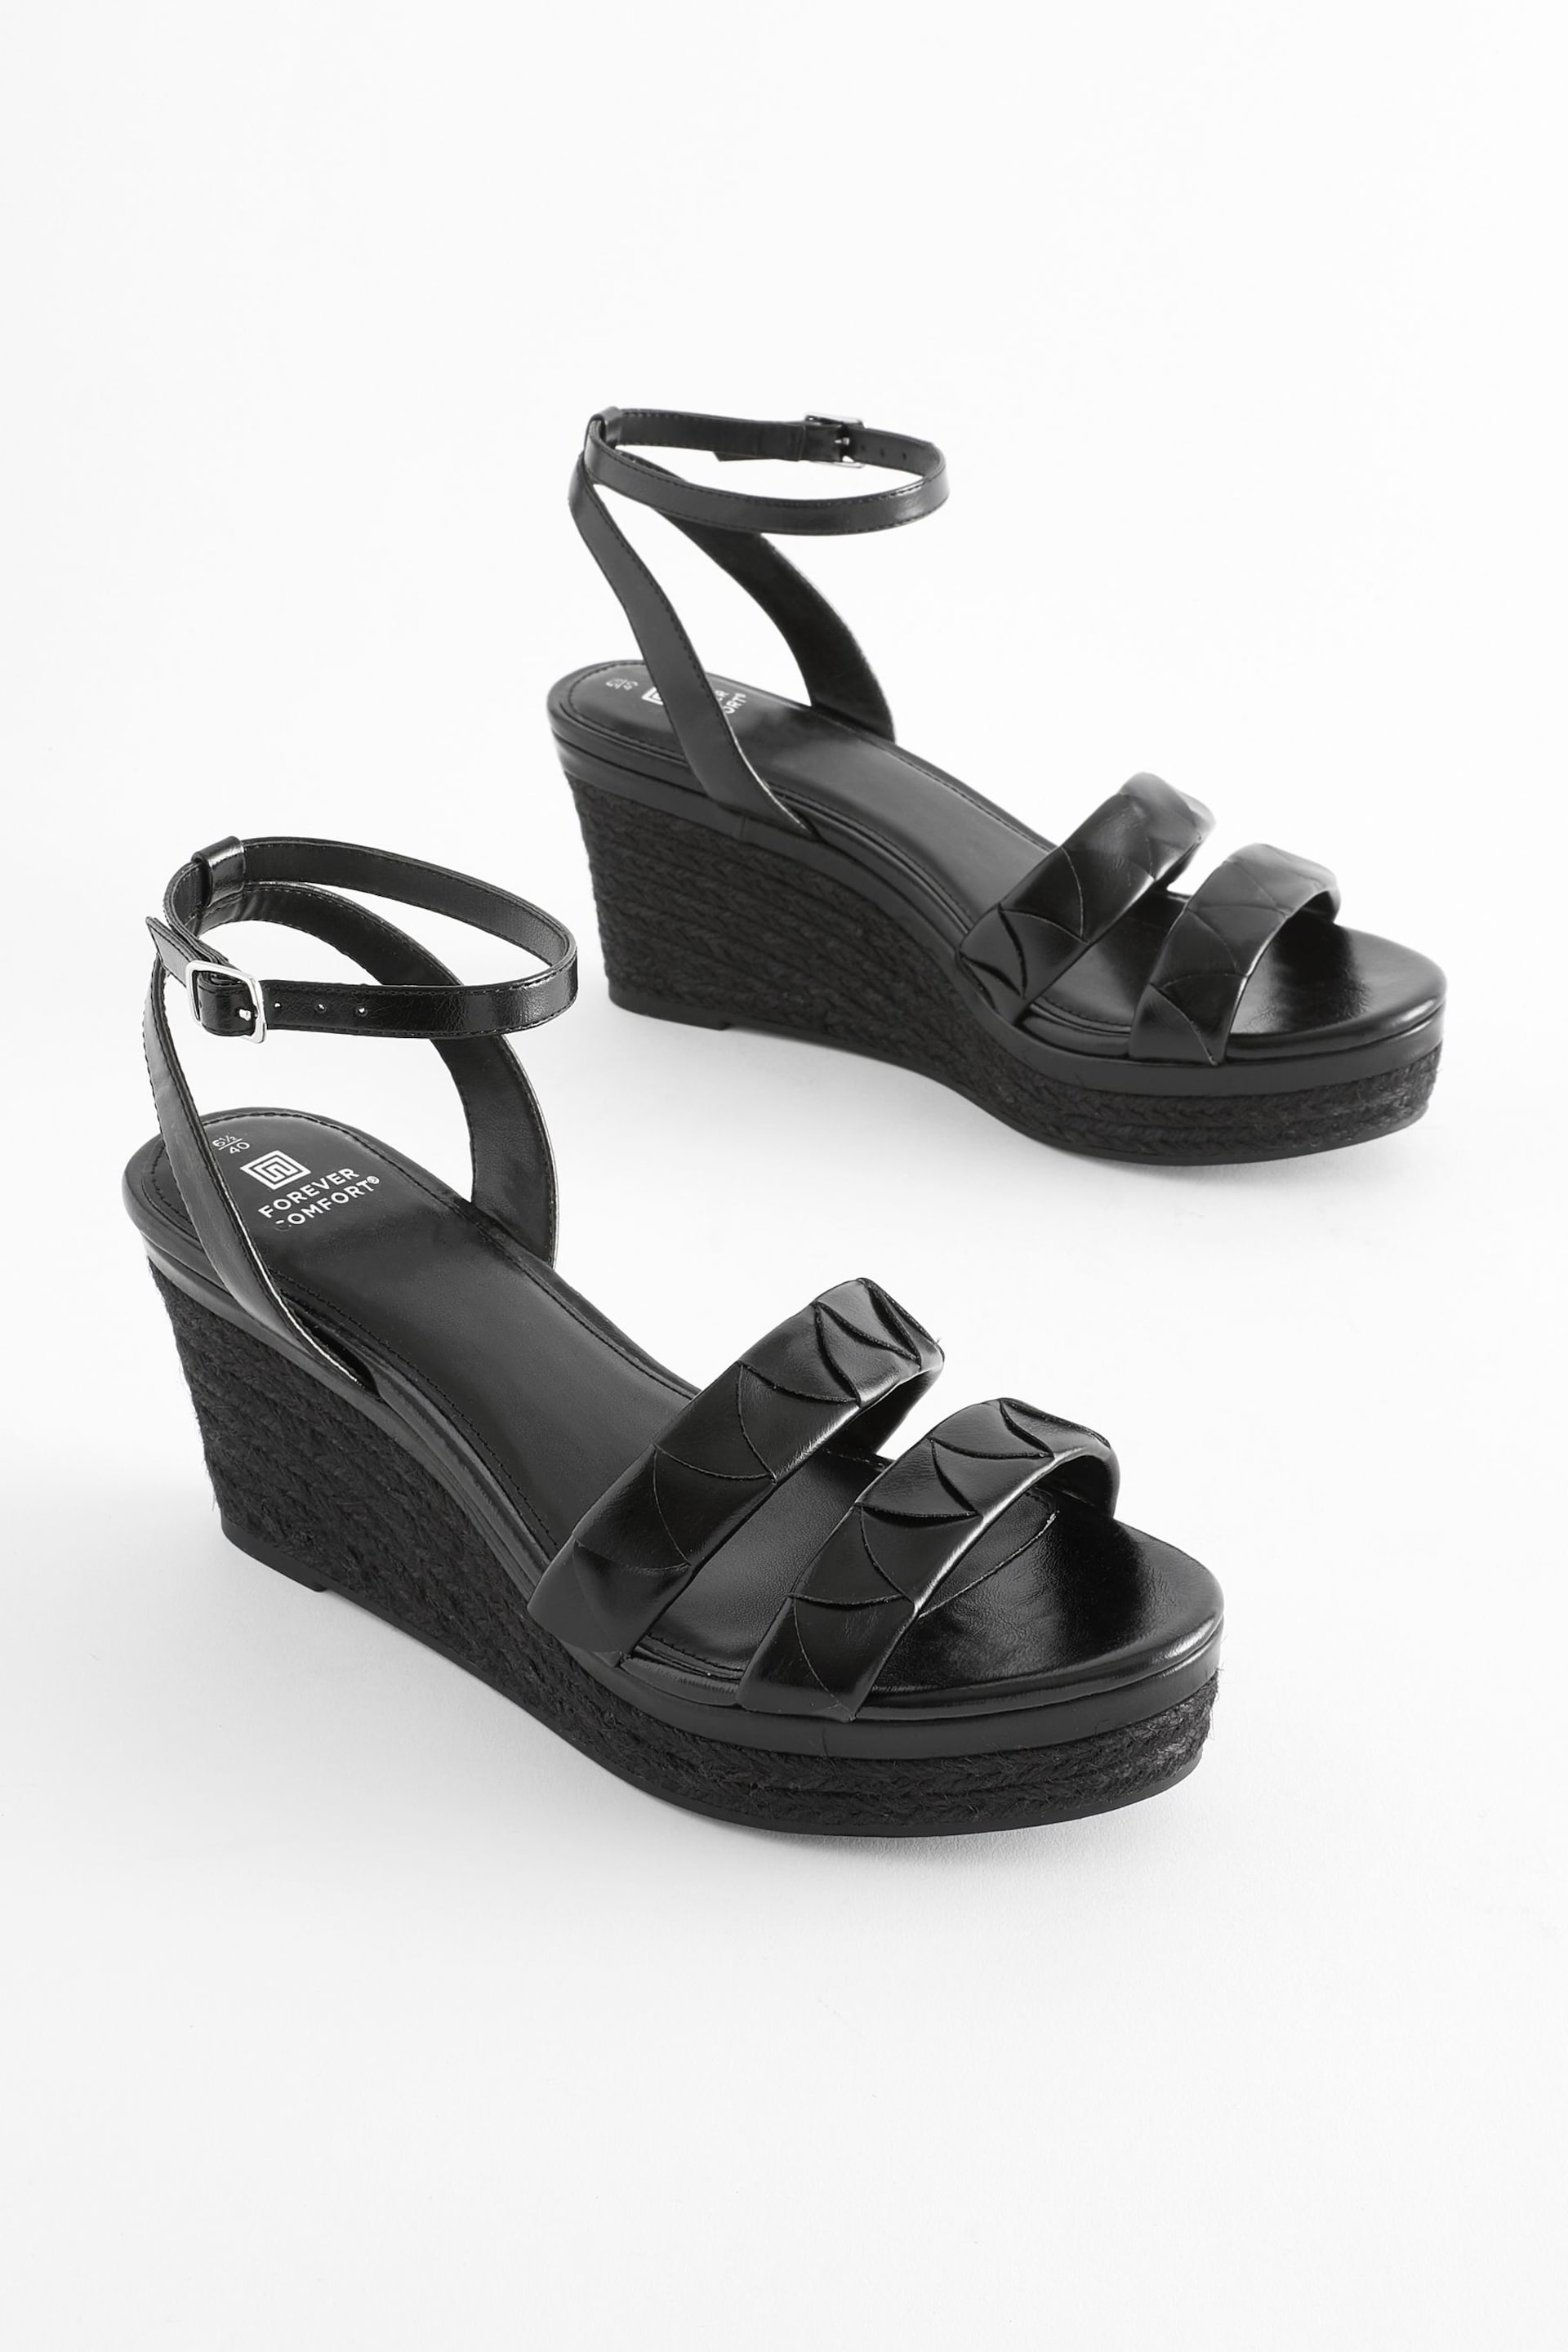 Black Extra Wide Fit Forever Comfort® Double Strap Wedges - Image 1 of 5